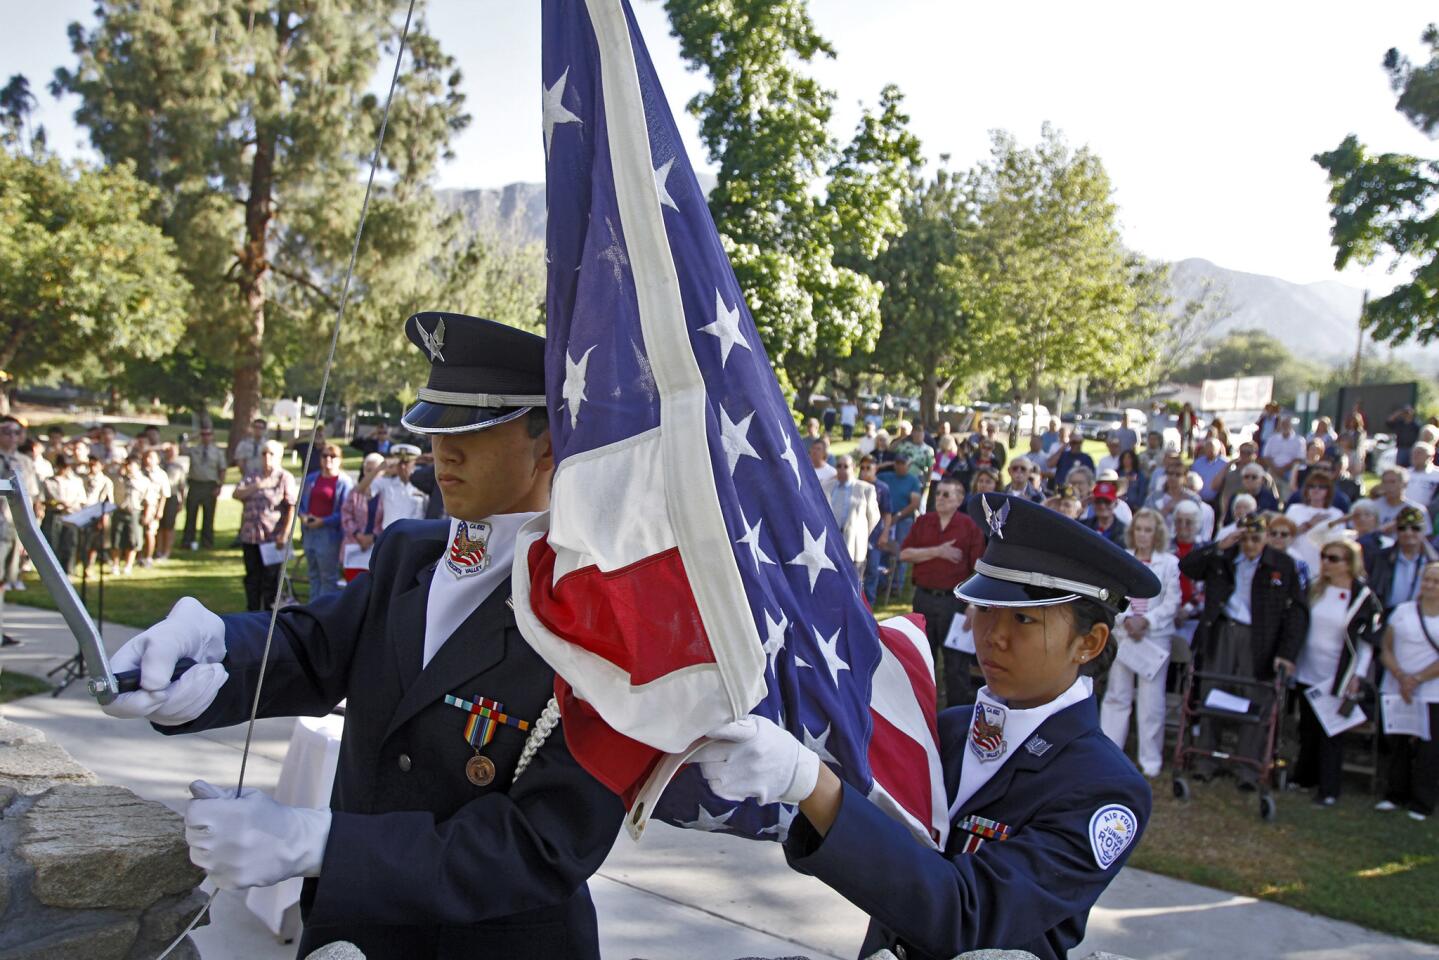 Members of the Crescenta Valley High School ROTC raise the US flag during Memorial Day celebration at Two Strike Park in La Crescenta on Monday May 26, 2014.